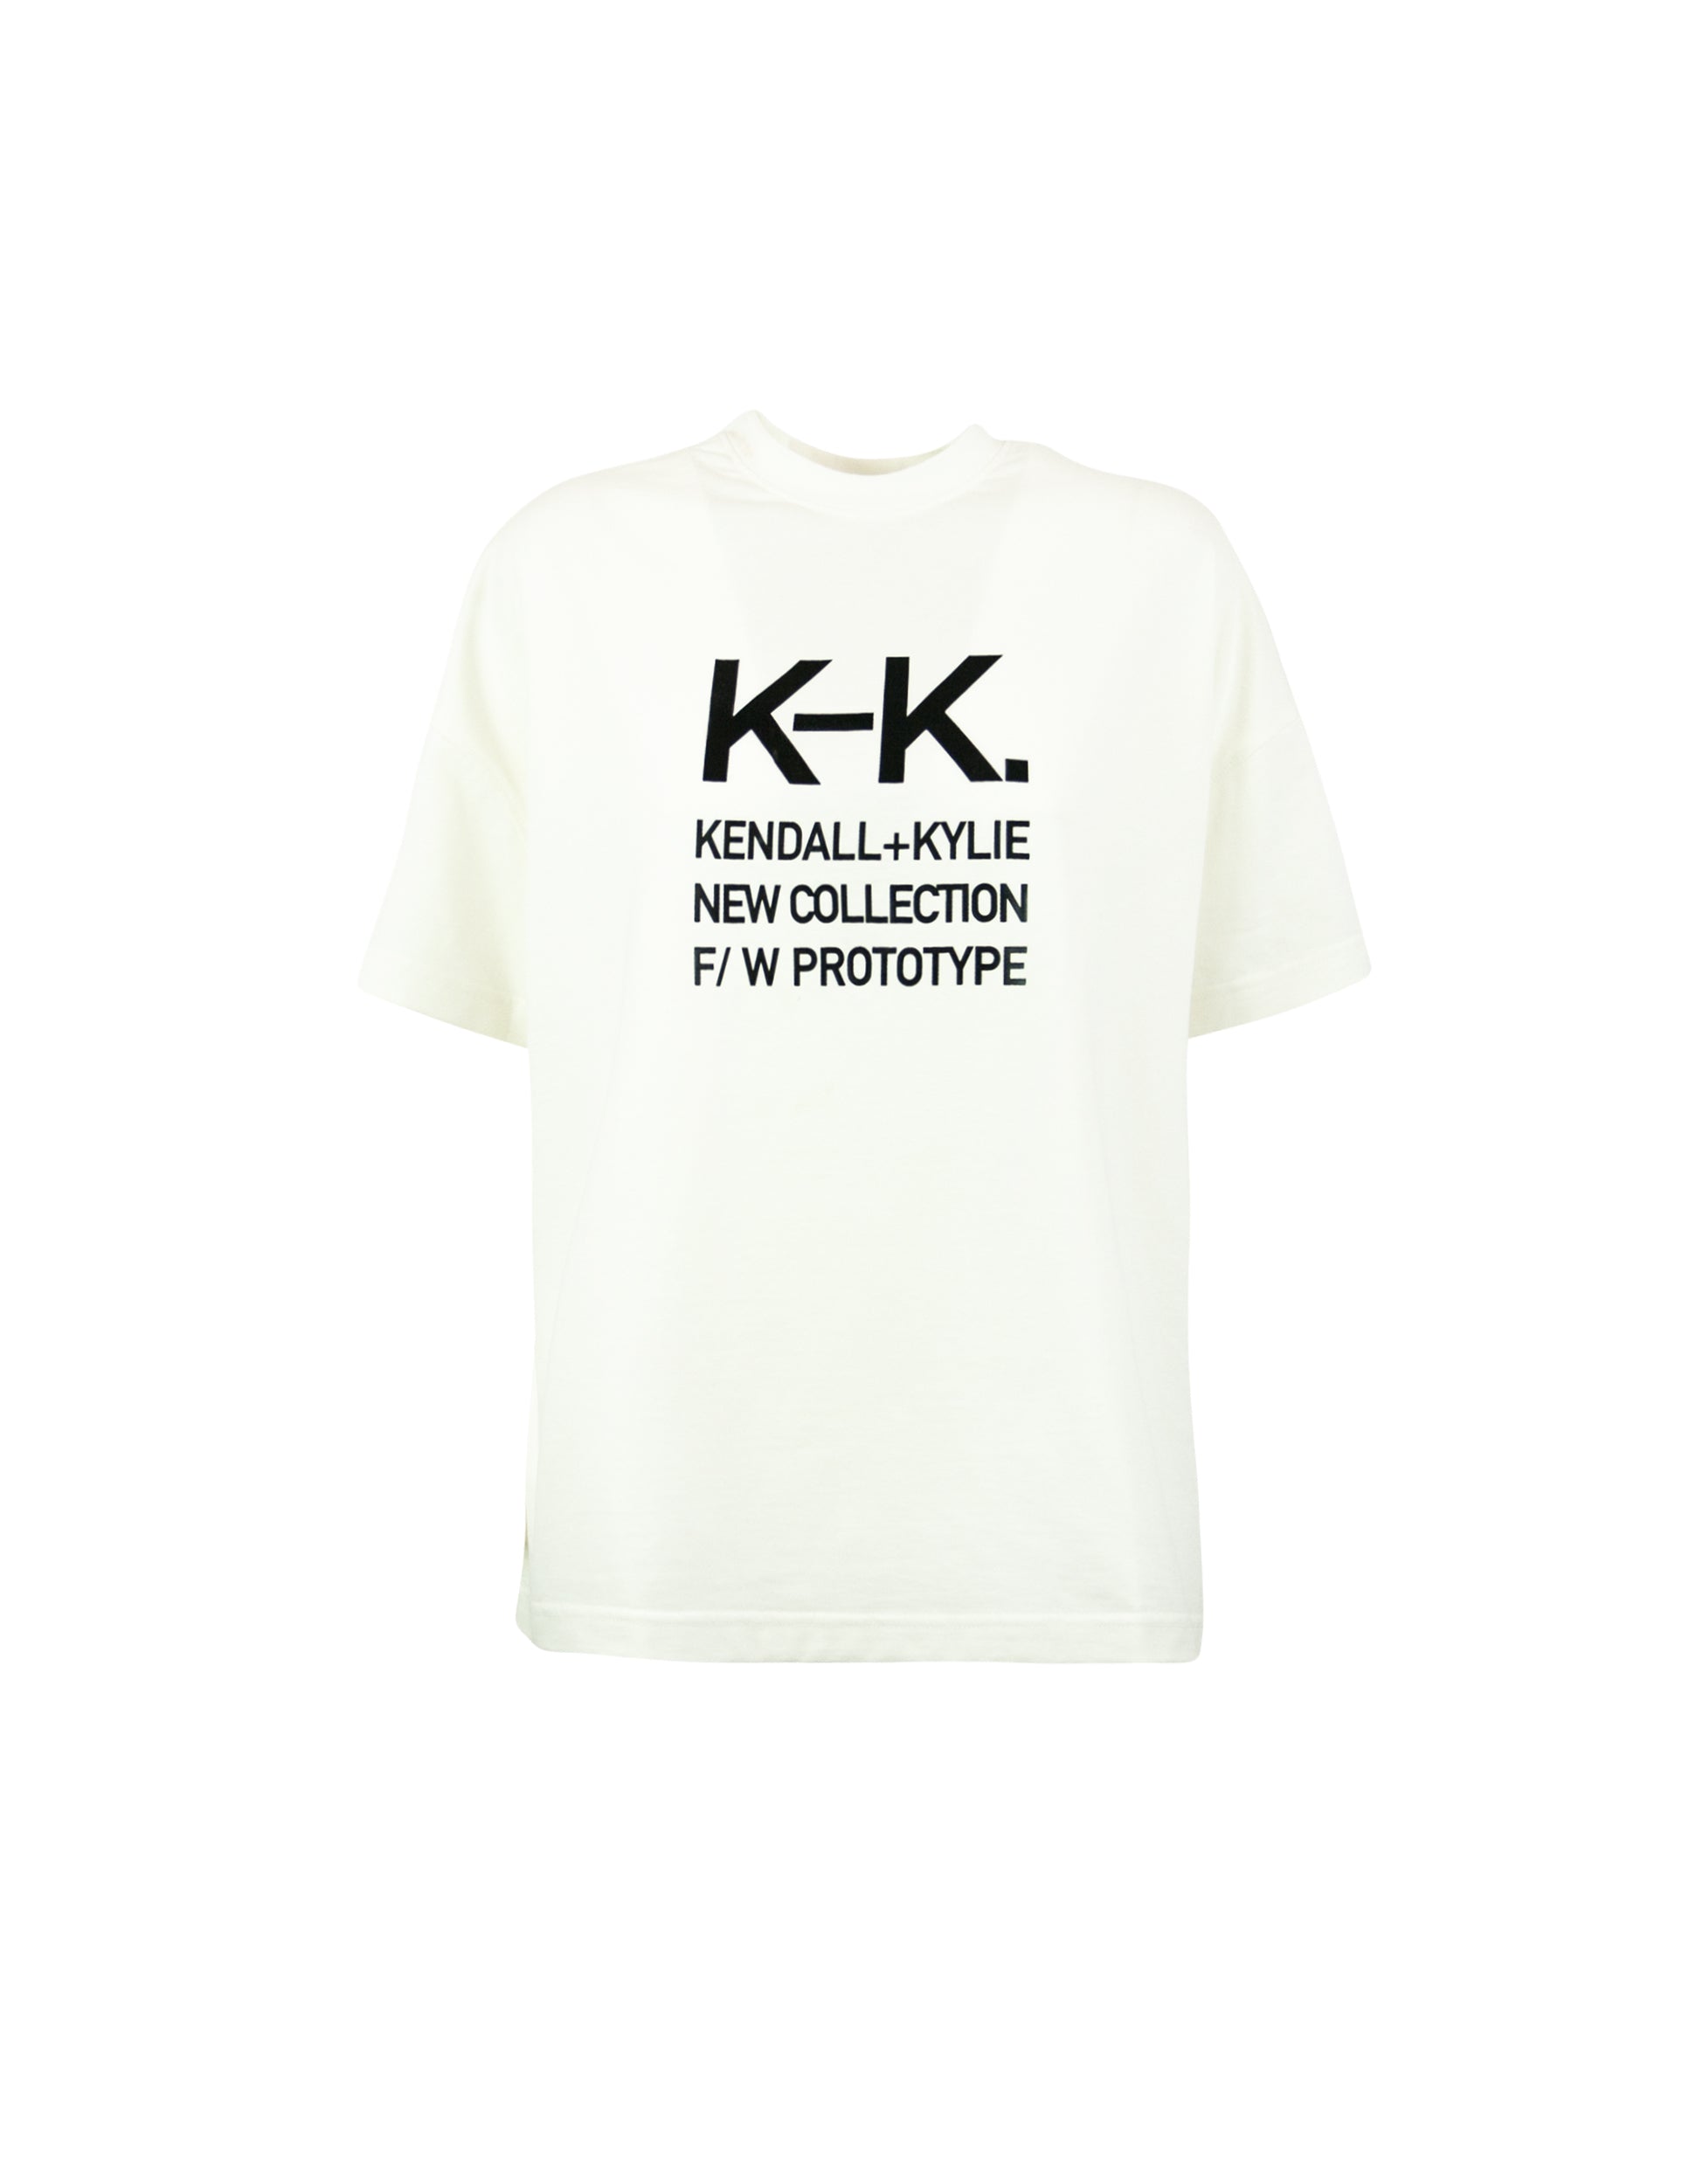 KENDALL AND KYLIE
T-shirt Bianca "K+K" Kendall + Kylie